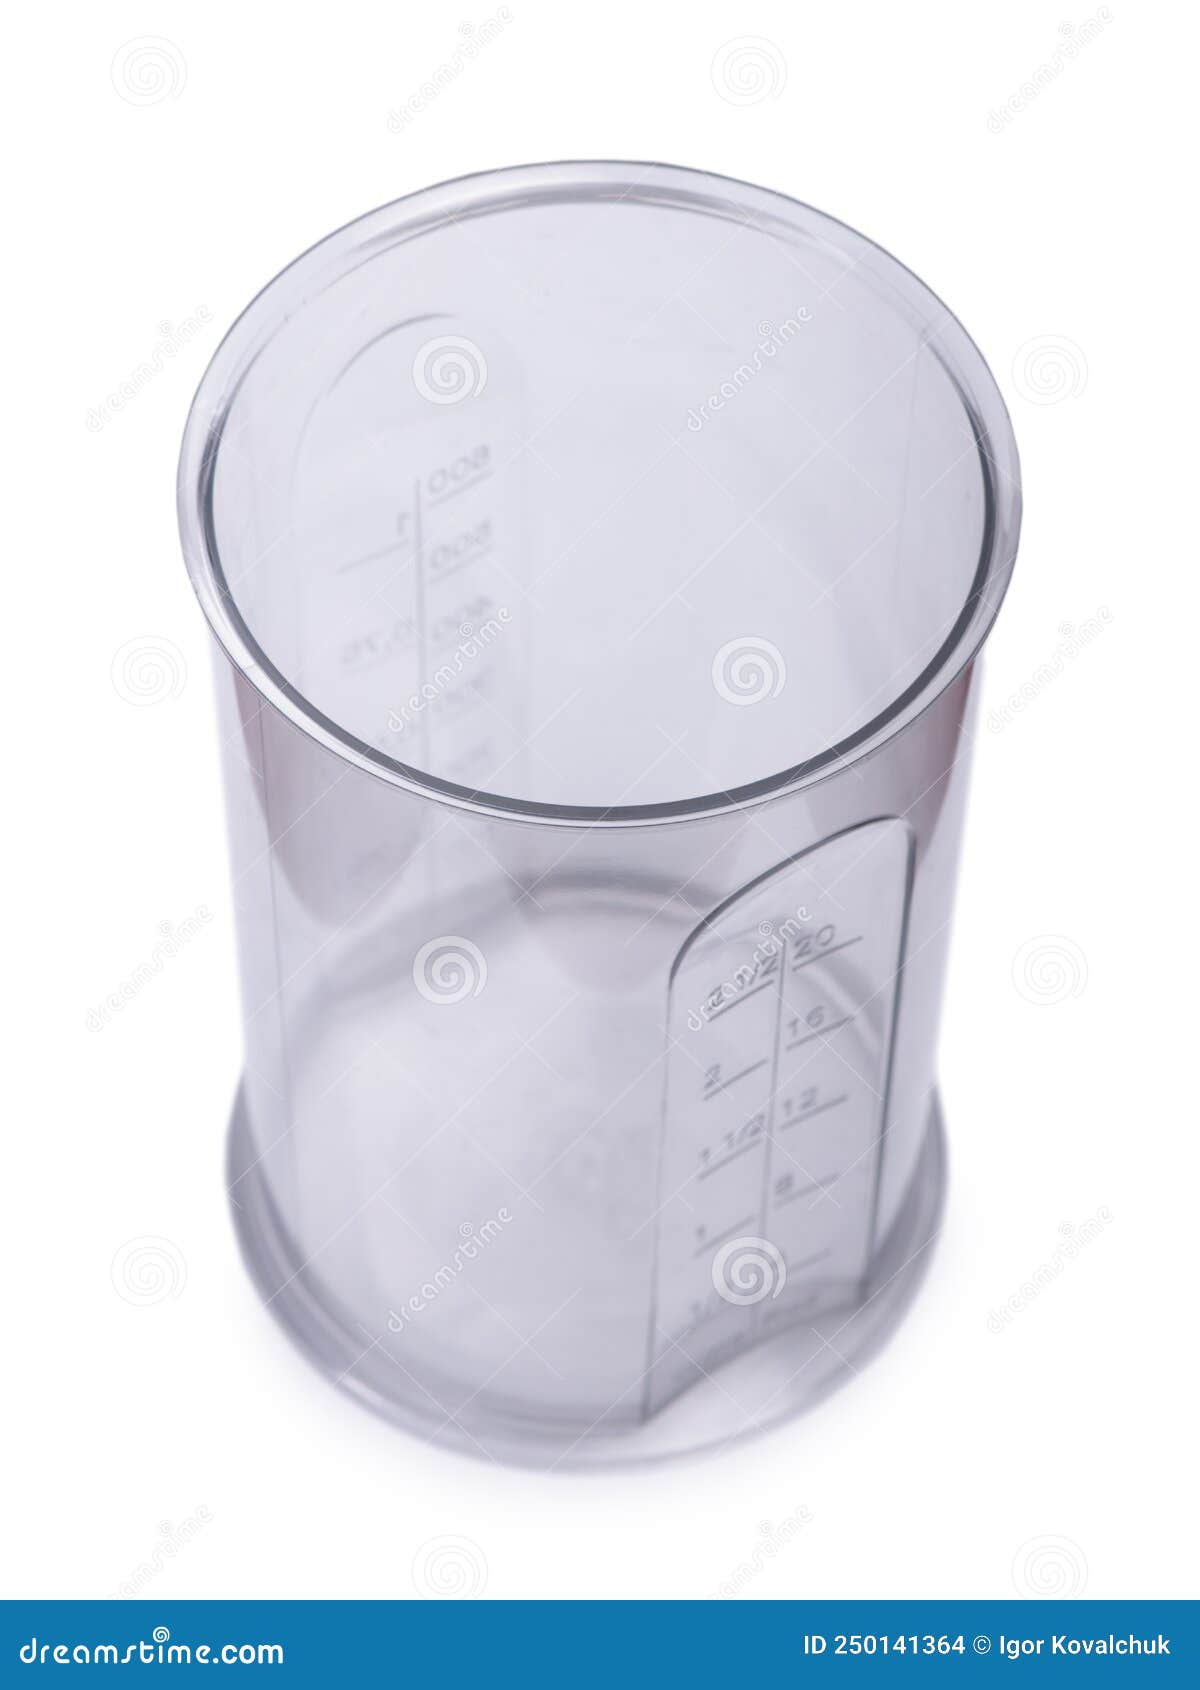 https://thumbs.dreamstime.com/z/kitchen-measuring-cup-isolated-white-background-250141364.jpg